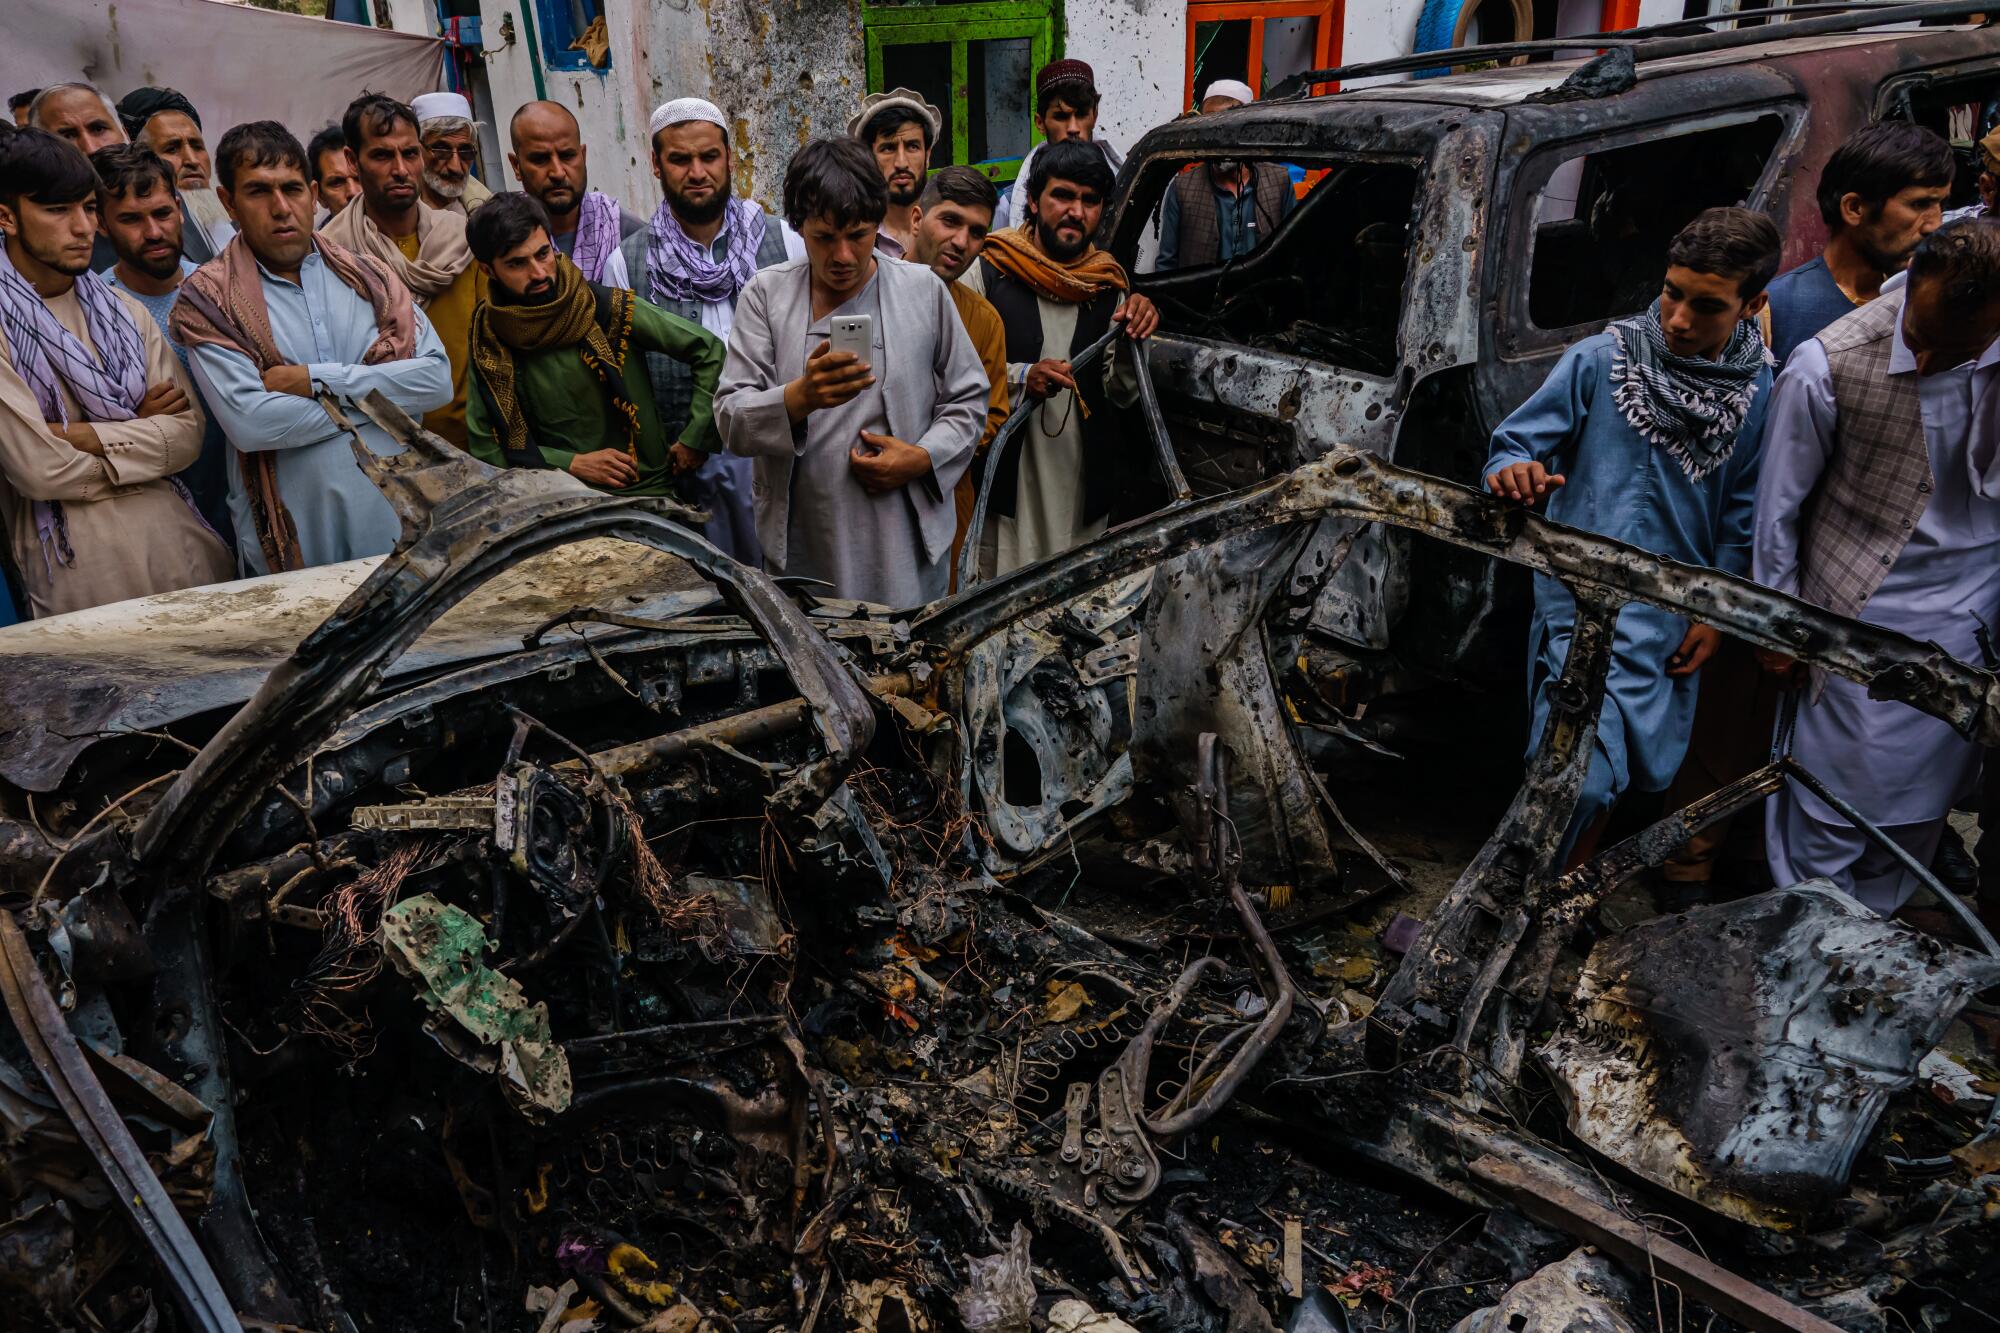 People gathering around burned-out vehicle